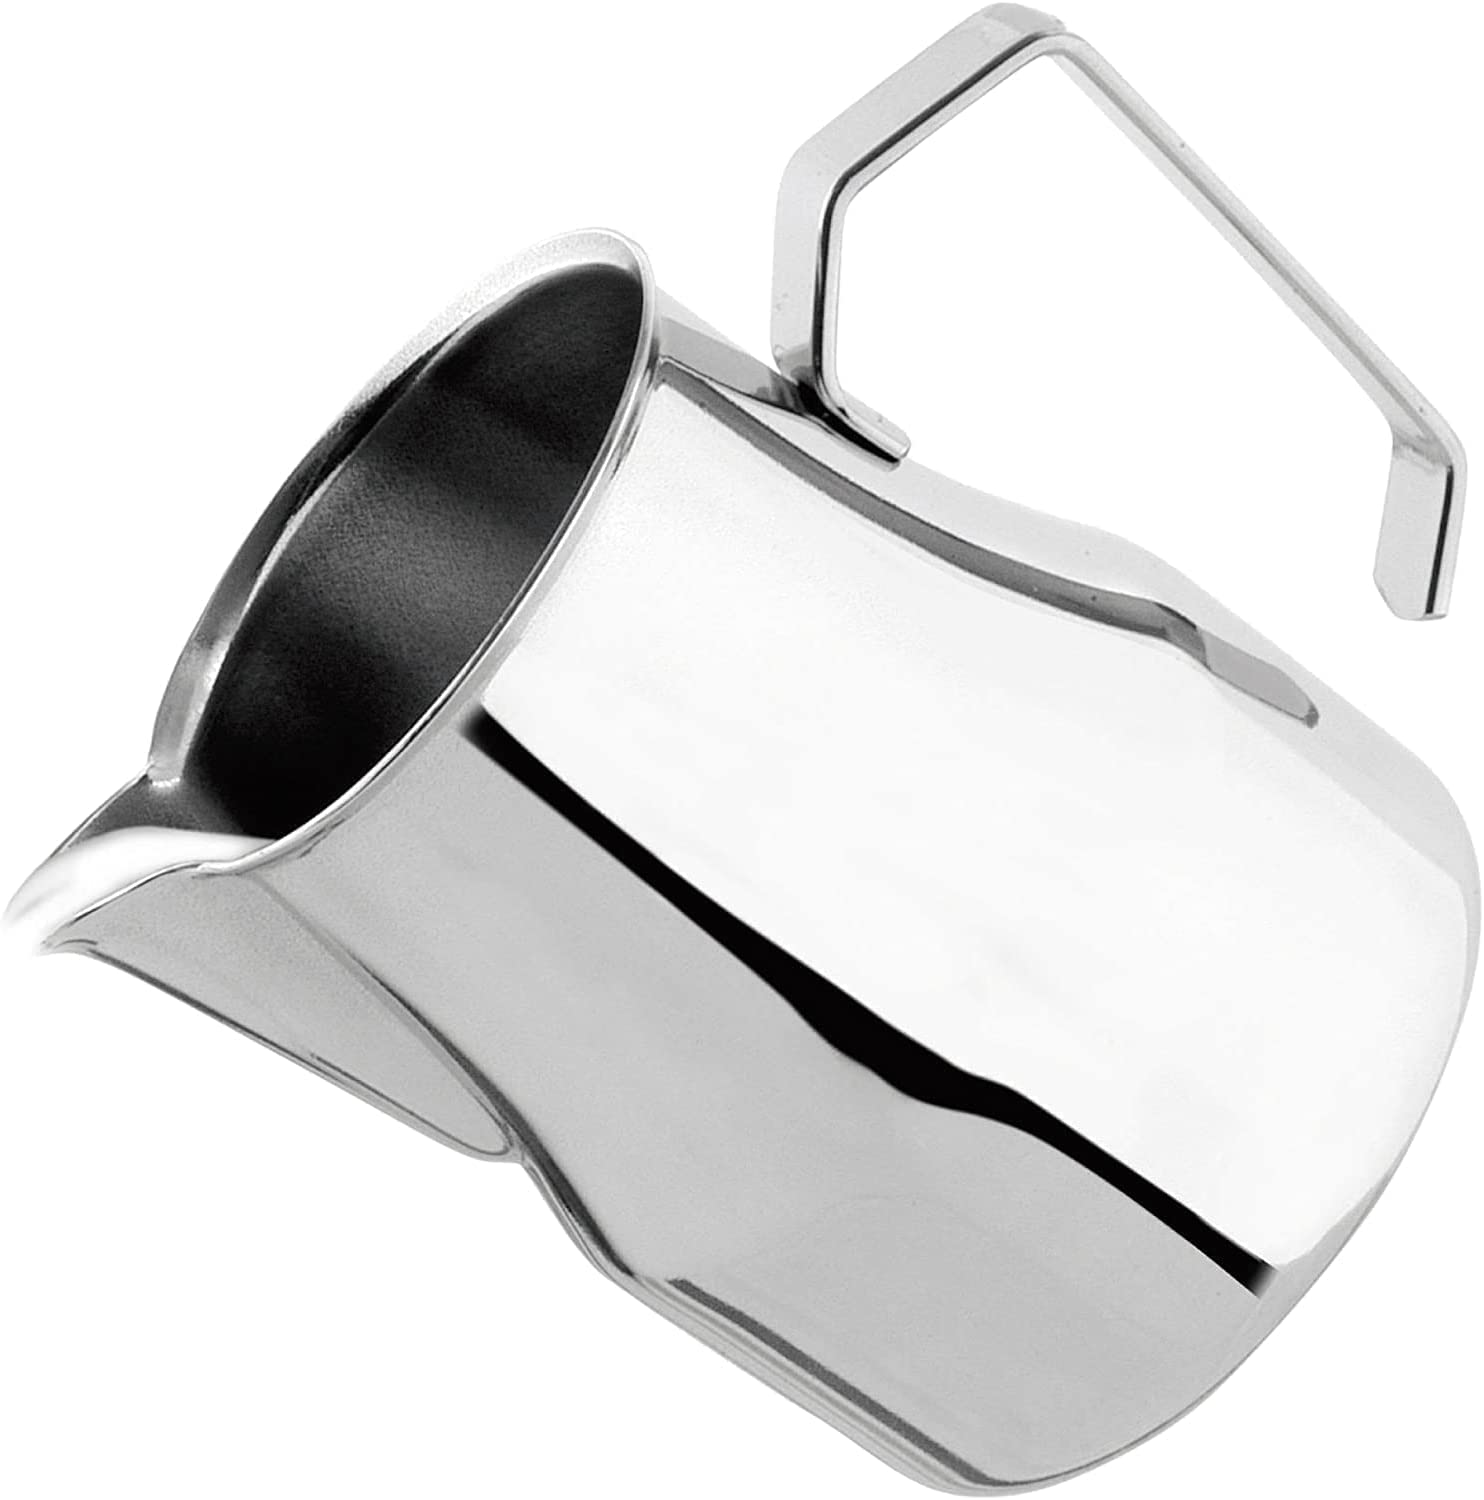 Stainless Steel Milk Jug Special Latte Capuccino Art Spout - Made In Italy By Motta (1000 ML)